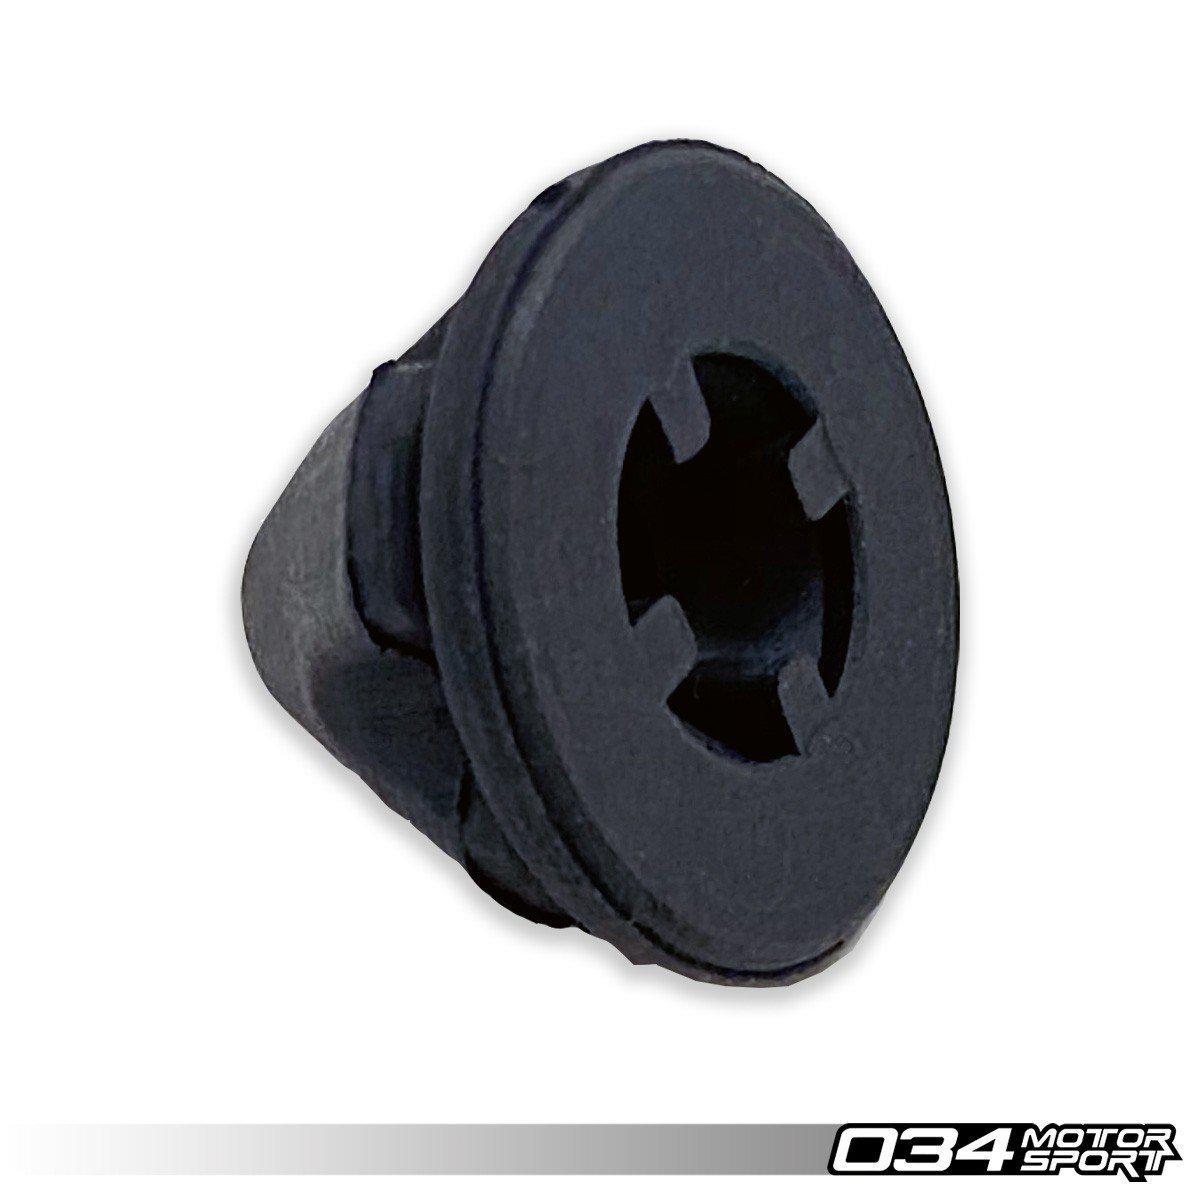 Density Line Engine Cover Grommets For Audi 8V.5 RS3 And 8S TTRS-A Little Tuning Co